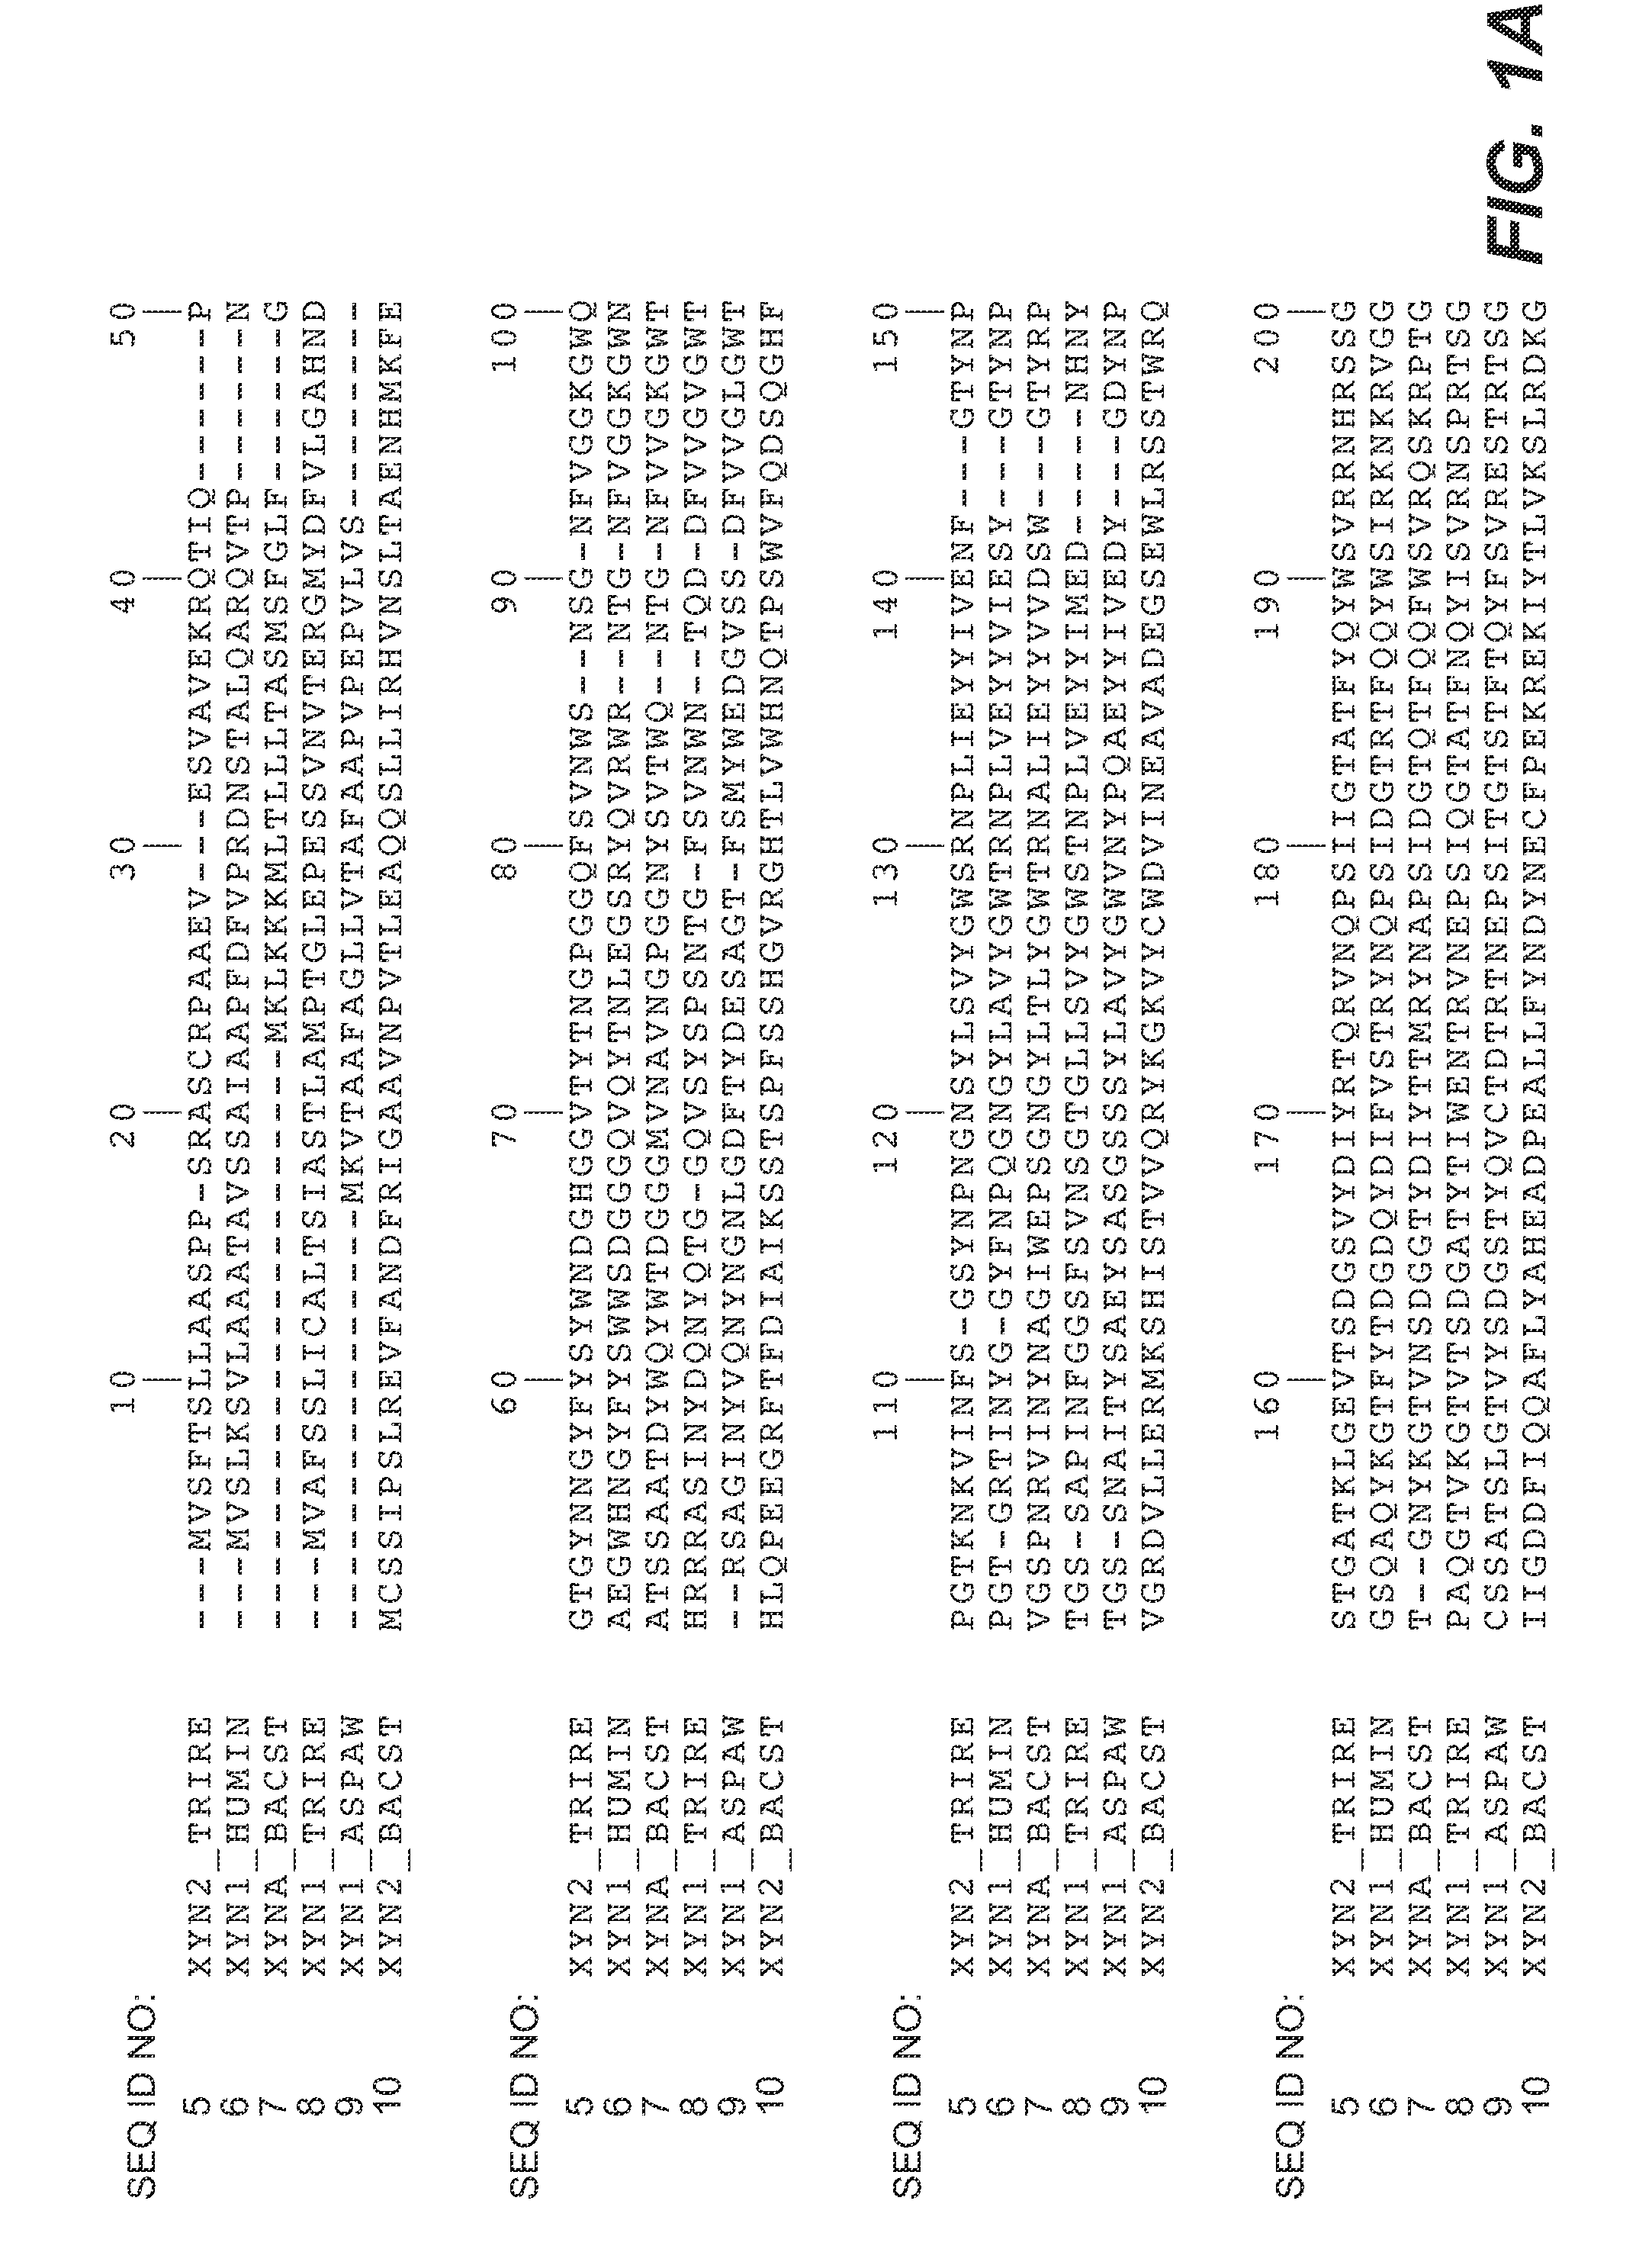 Modified enzymes, methods to produce modified enzymes and uses thereof